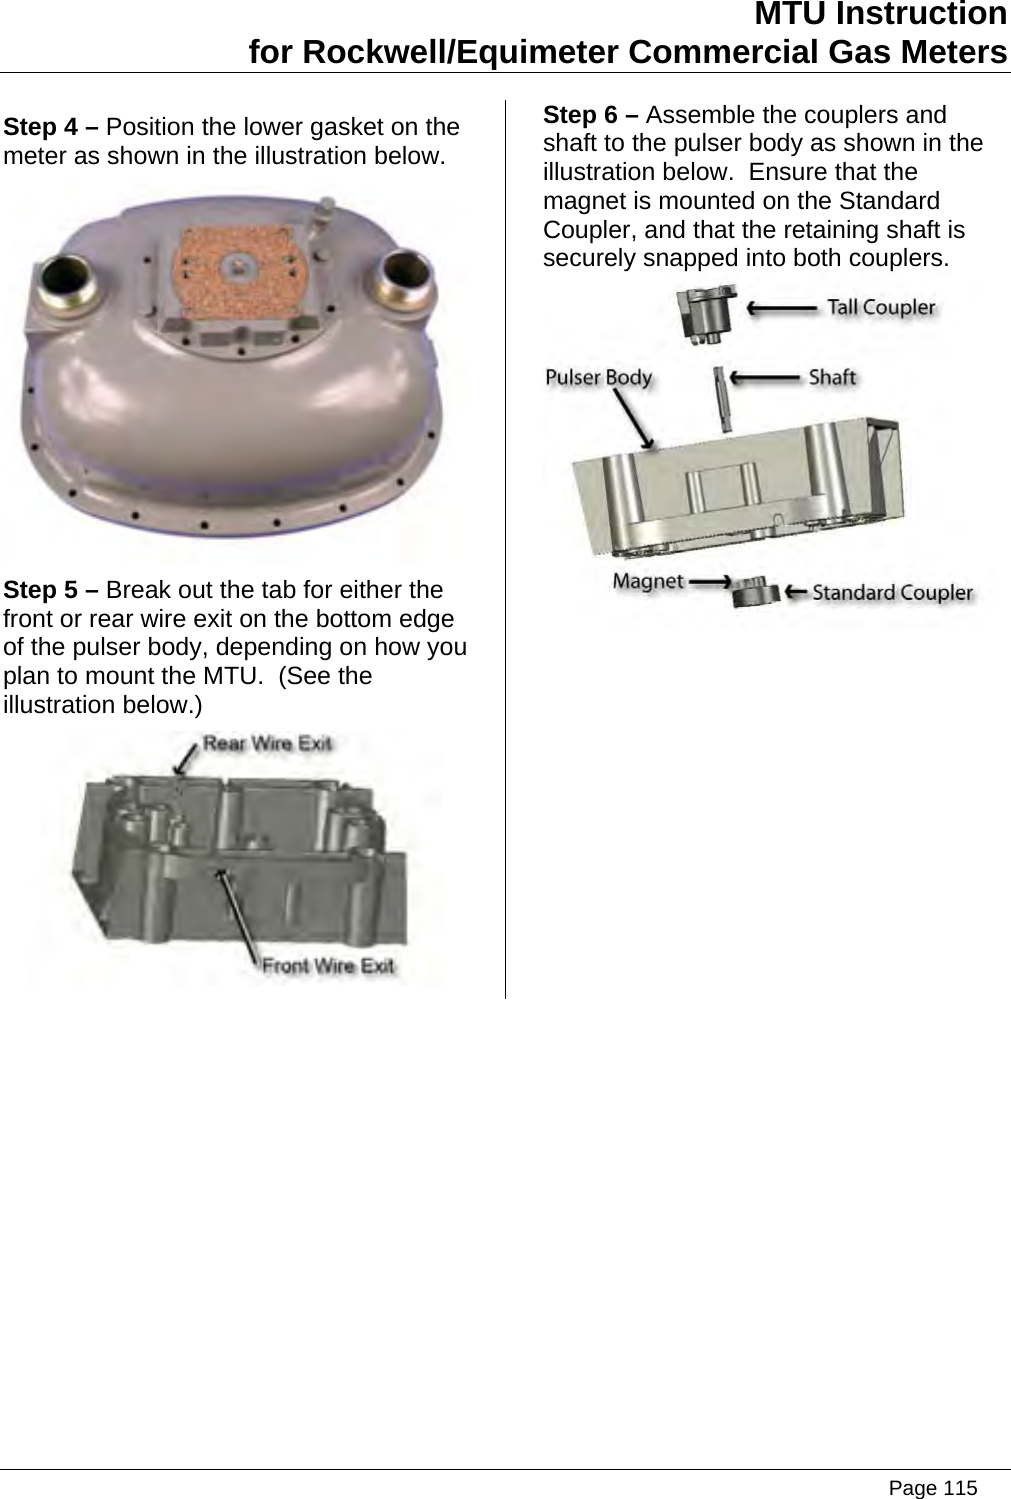 MTU Instruction for Rockwell/Equimeter Commercial Gas Meters Step 4 – Position the lower gasket on the meter as shown in the illustration below.  Step 5 – Break out the tab for either the front or rear wire exit on the bottom edge of the pulser body, depending on how you plan to mount the MTU.  (See the illustration below.)  Step 6 – Assemble the couplers and shaft to the pulser body as shown in the illustration below.  Ensure that the magnet is mounted on the Standard Coupler, and that the retaining shaft is securely snapped into both couplers.    Page 115